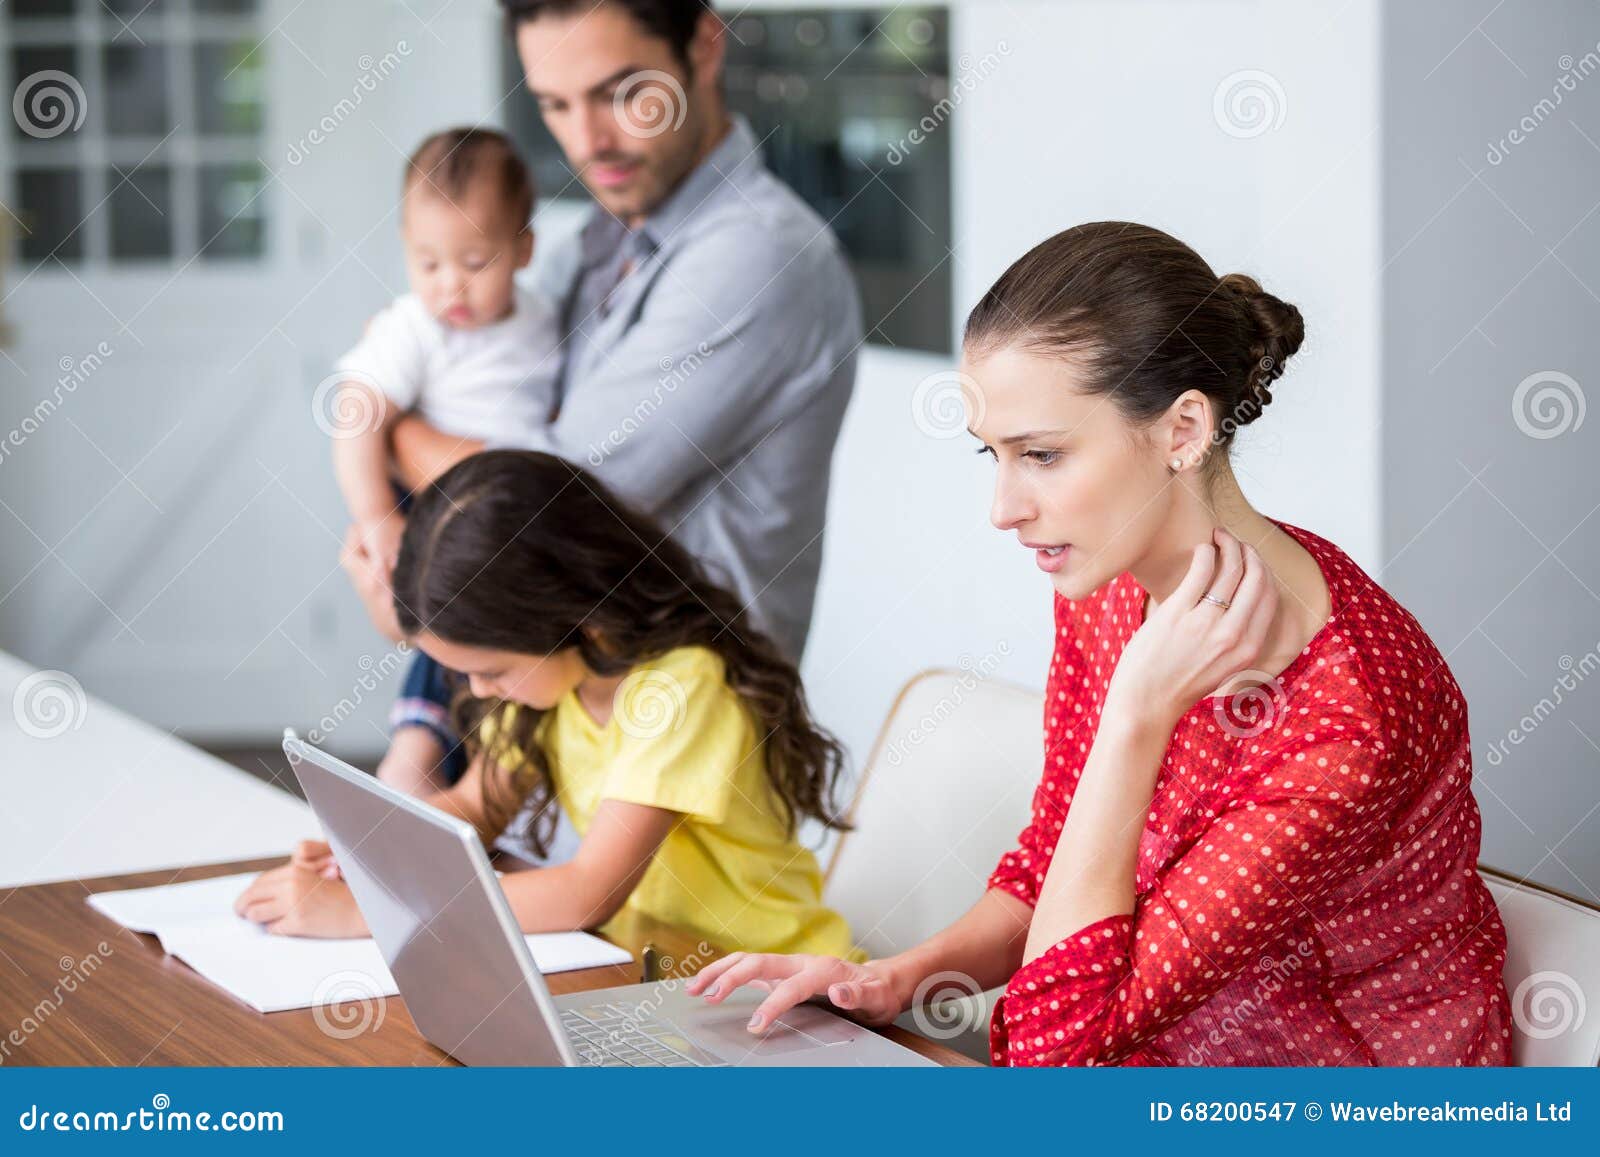 mother working on laptop with daughter studying